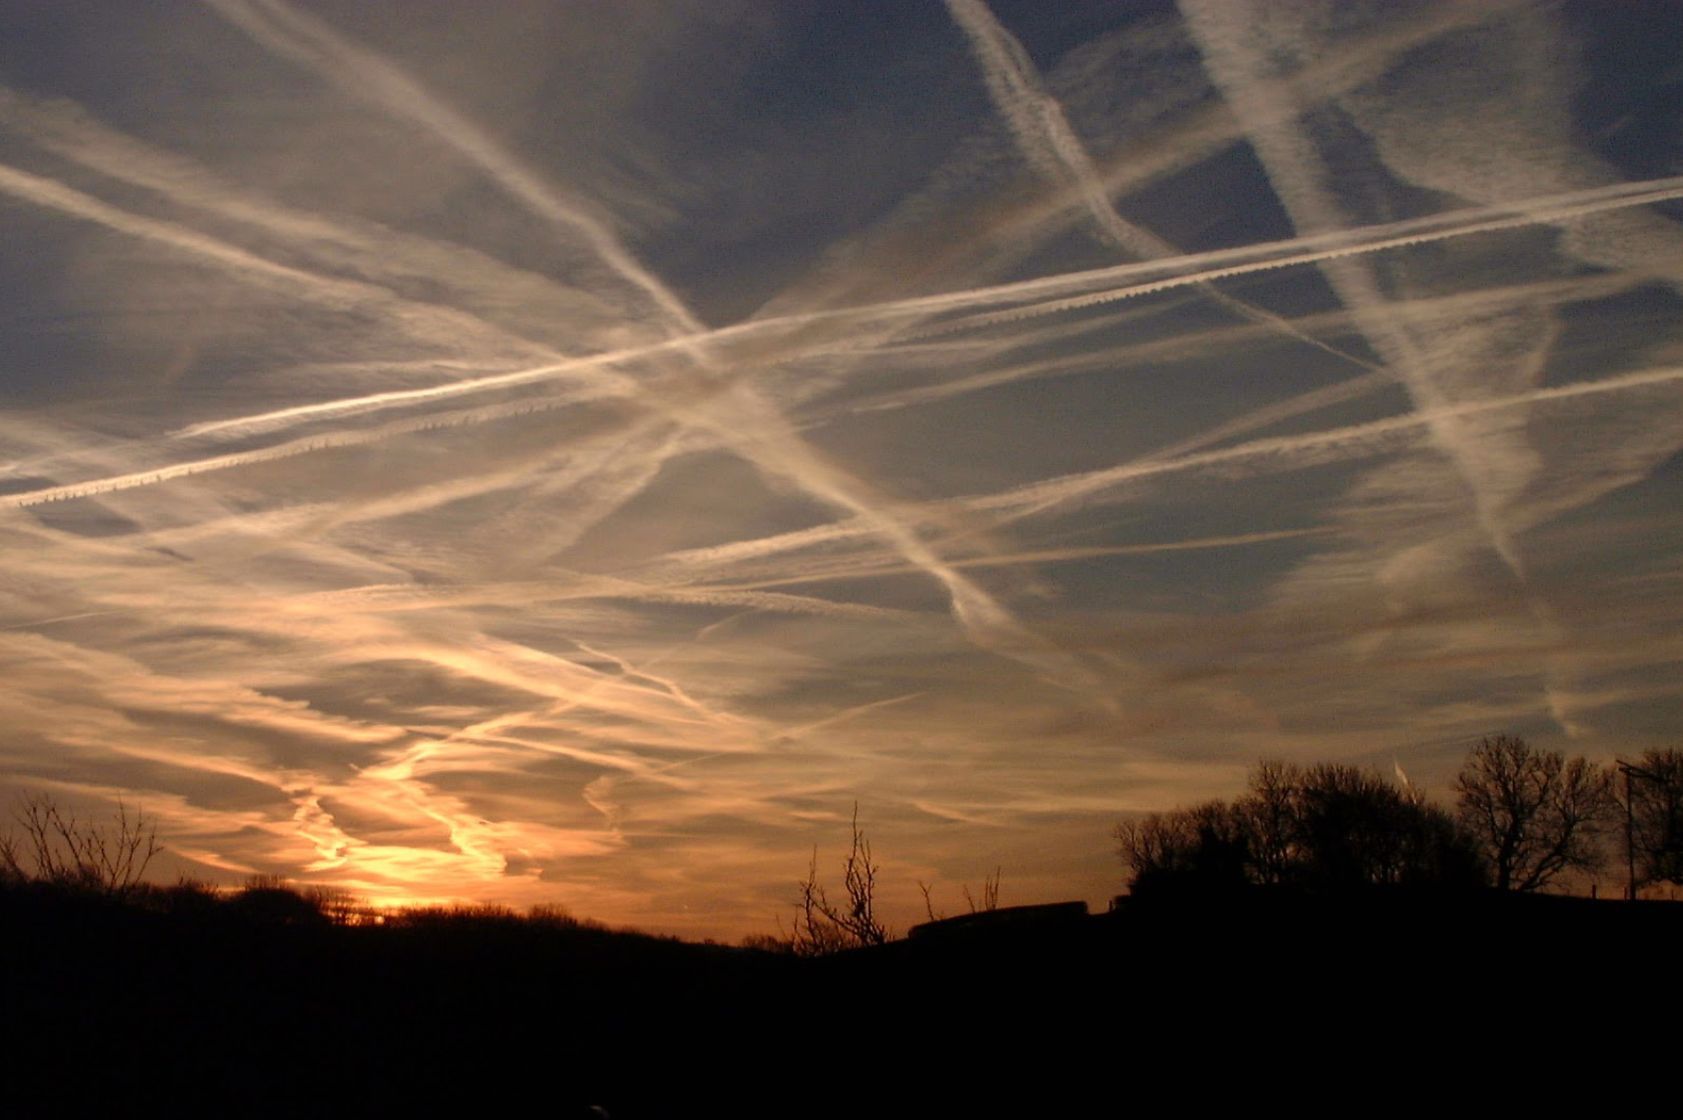 Chemtrails | How They Affect You and What You Can Do